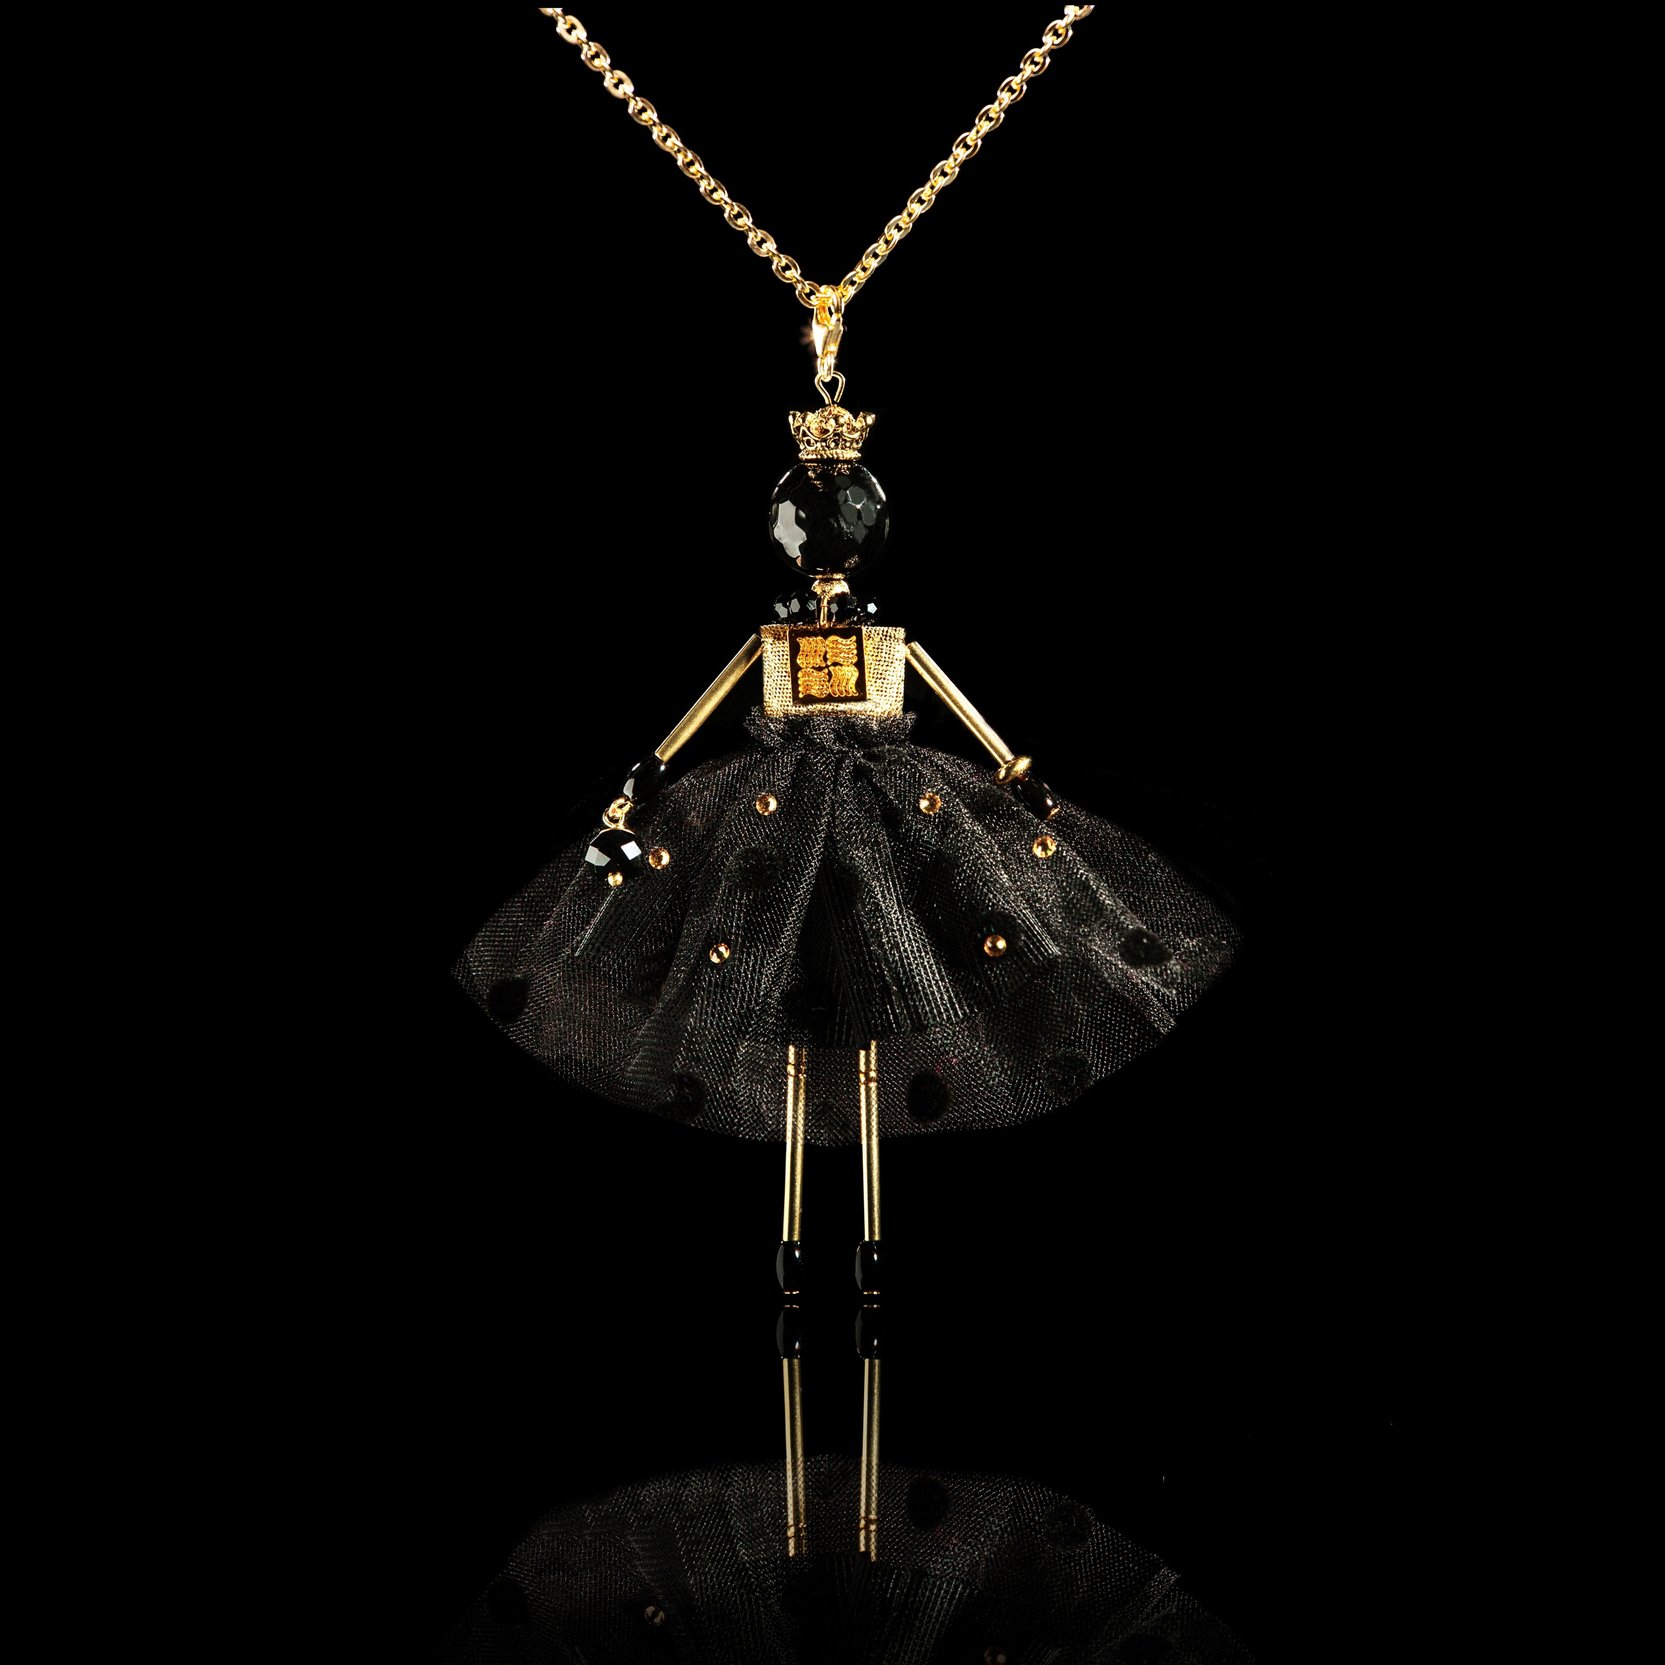 The pendant doll is the majestic Black Queen.